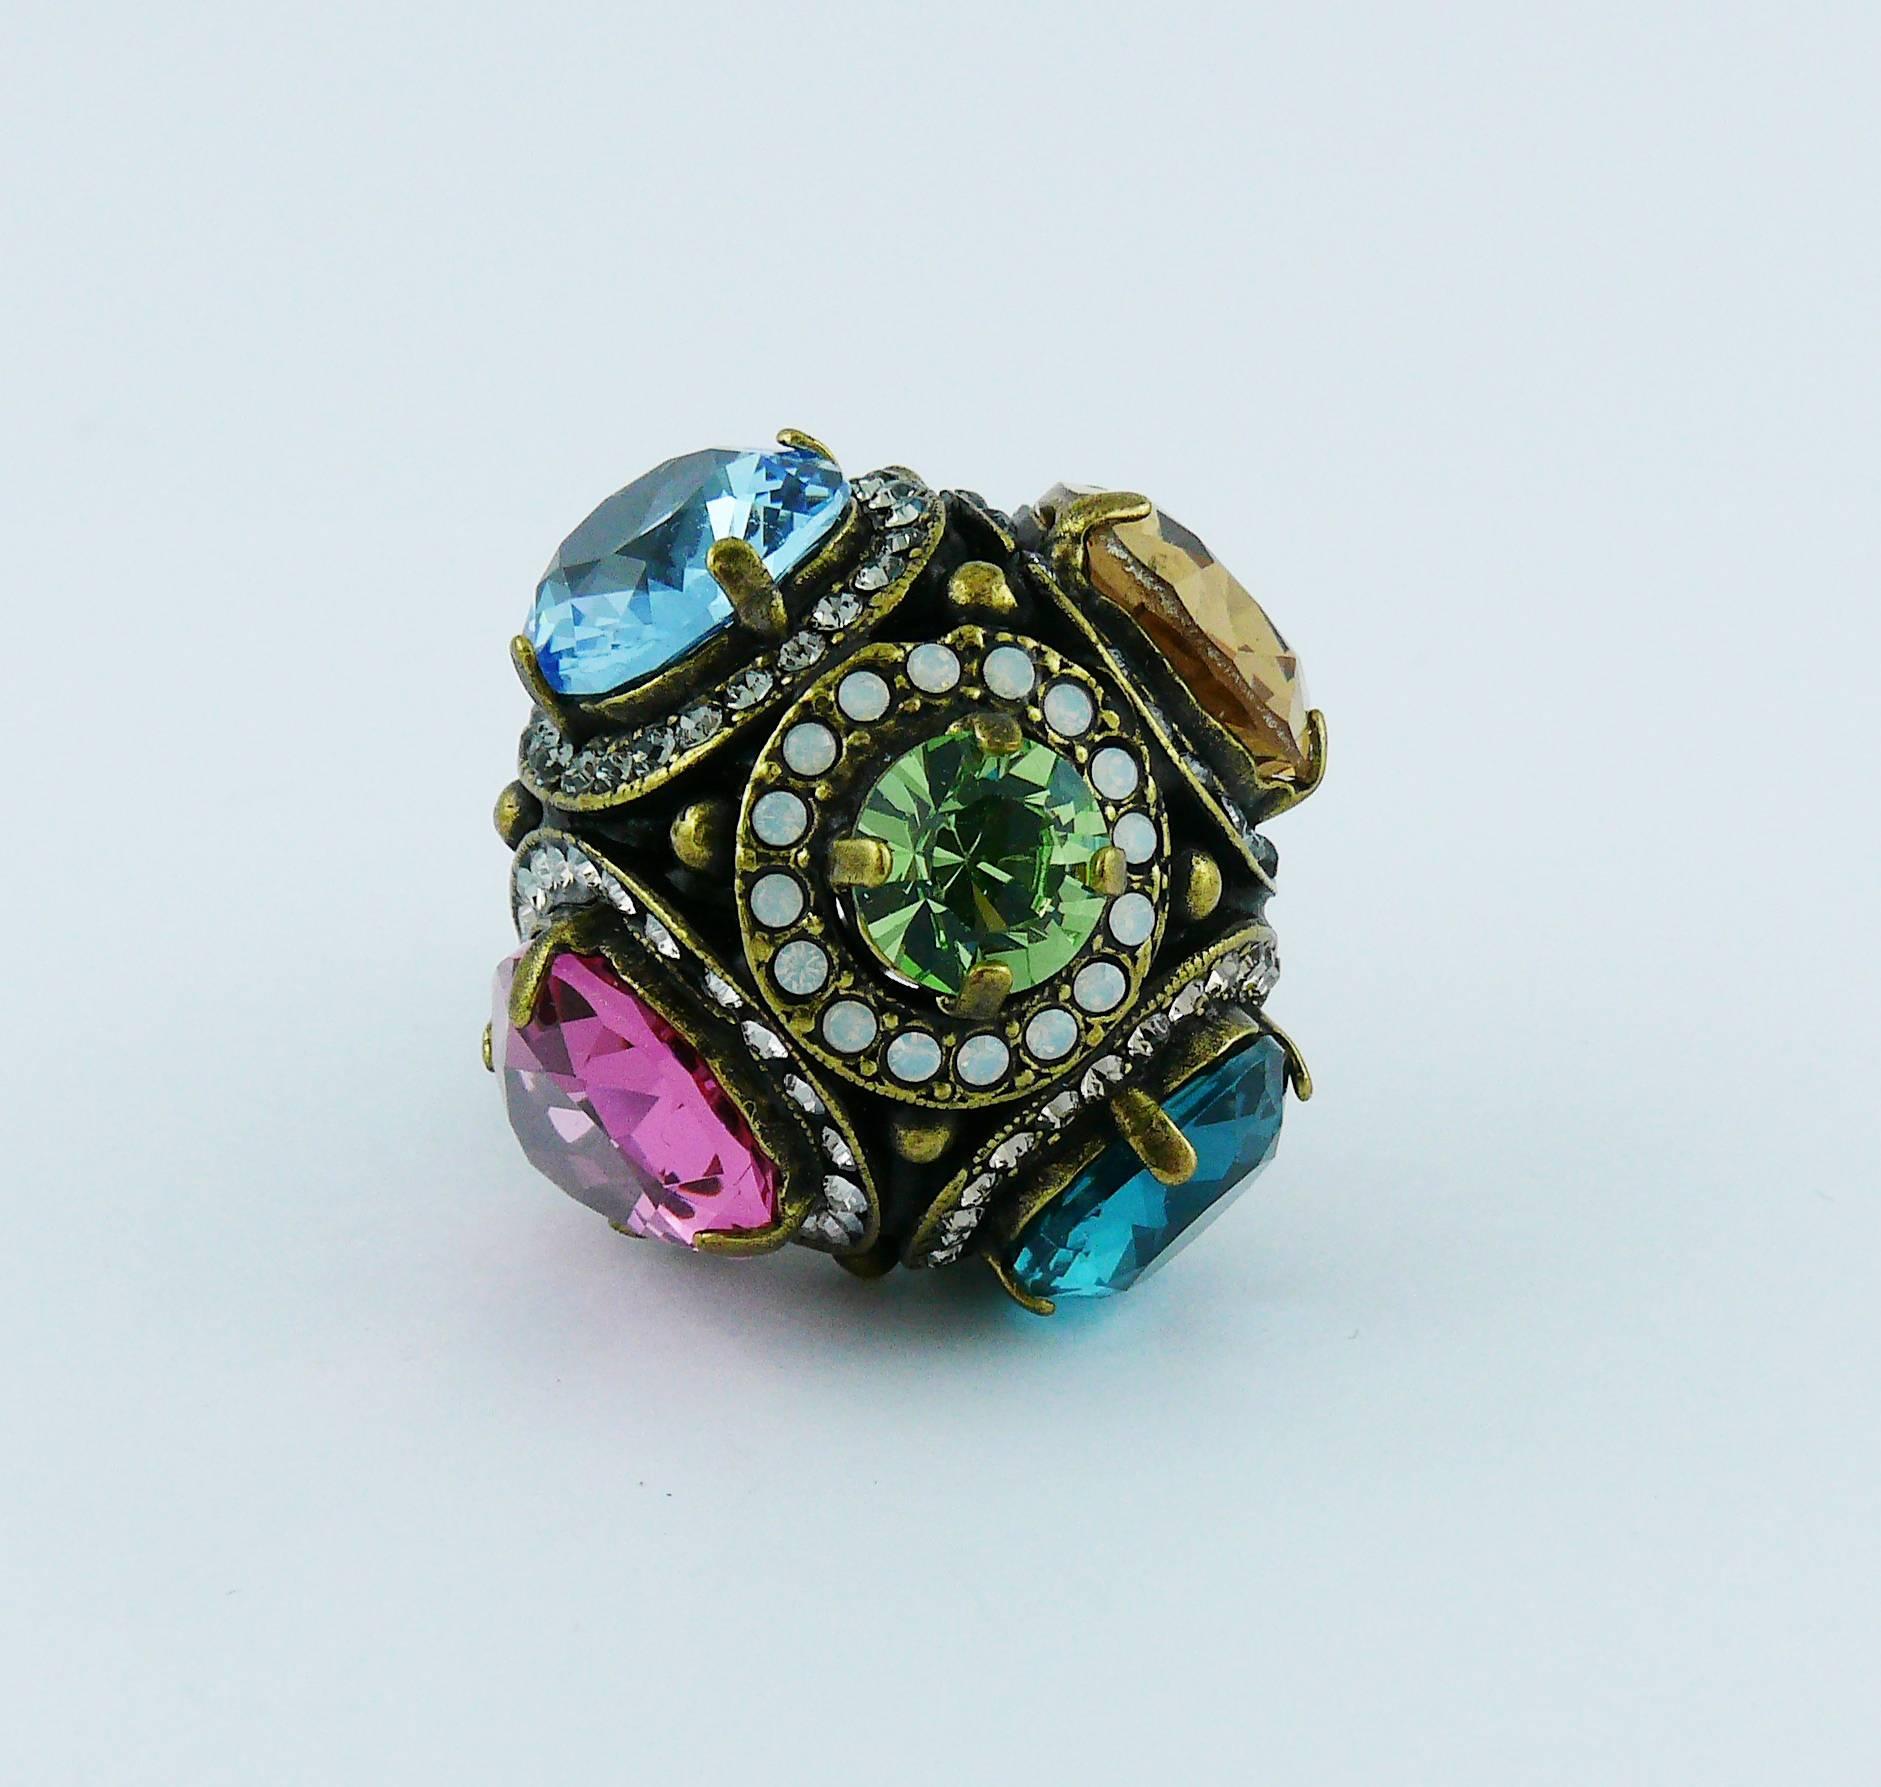 LANVIN dome ring featuring multicolored crystals in a bronze tone setting.

Embossed LANVIN.

Indicative measurements : inner circumference approx. 5.34 cm (2.10 inches).

JEWELRY CONDITION CHART
- New or never worn : item is in pristine condition